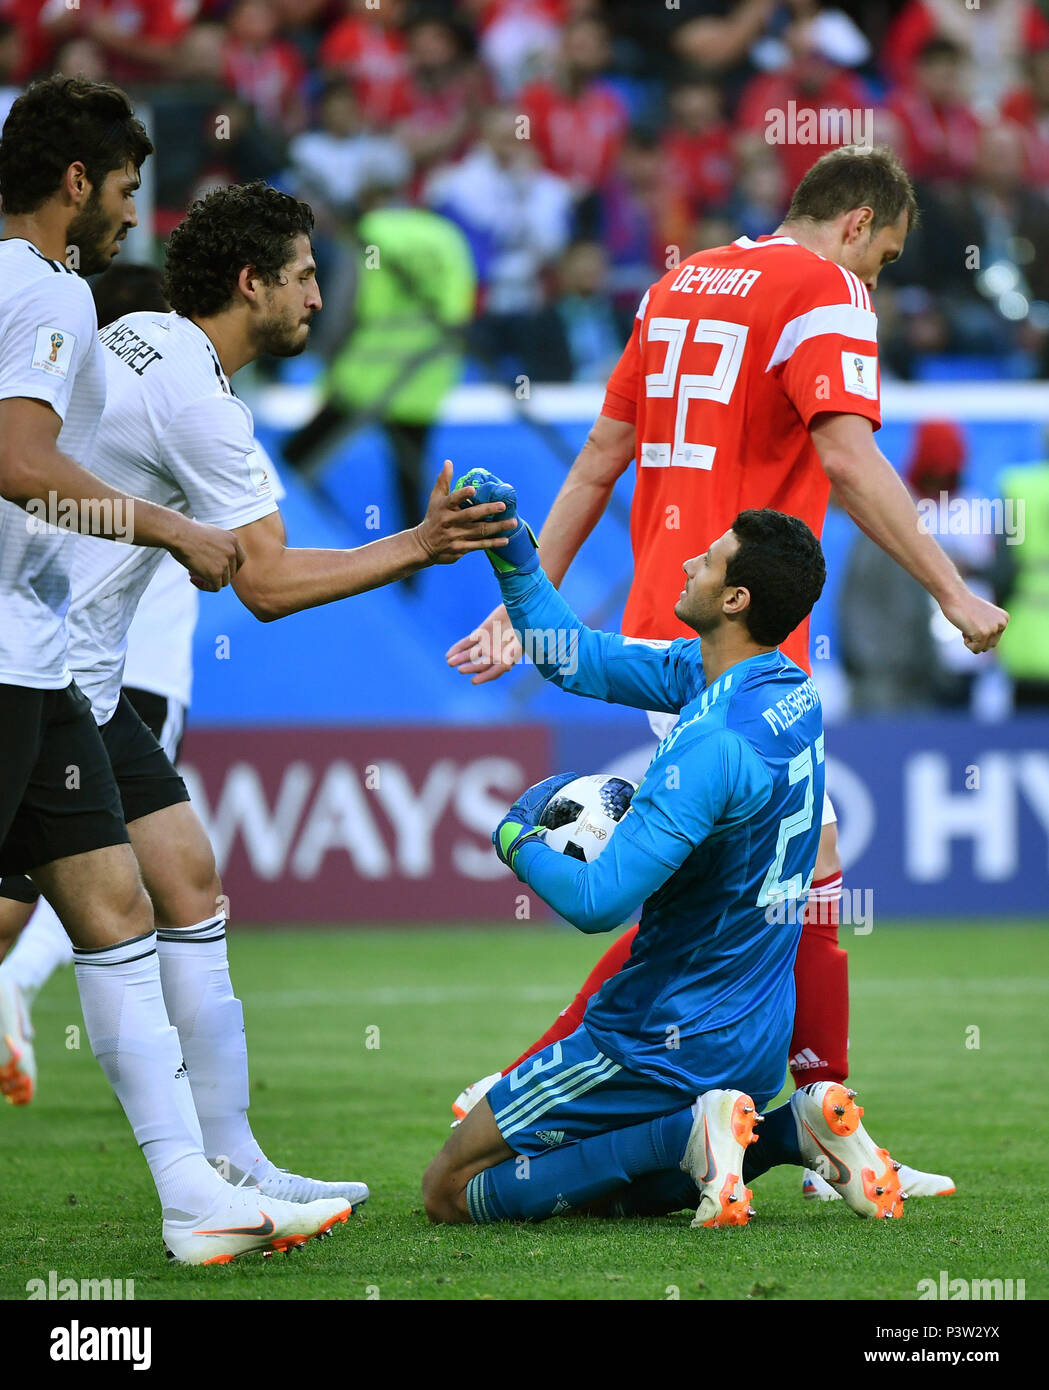 Saint Petersburg, Russia. 19th June, 2018. Goalkeeper Mohamed Elshenawy (R bottom) of Egypt claps with teammate Ahmed Hegazy (2nd L) during a Group A match between Russia and Egypt at the 2018 FIFA World Cup in Saint Petersburg, Russia, June 19, 2018. Credit: Li Ga/Xinhua/Alamy Live News Stock Photo